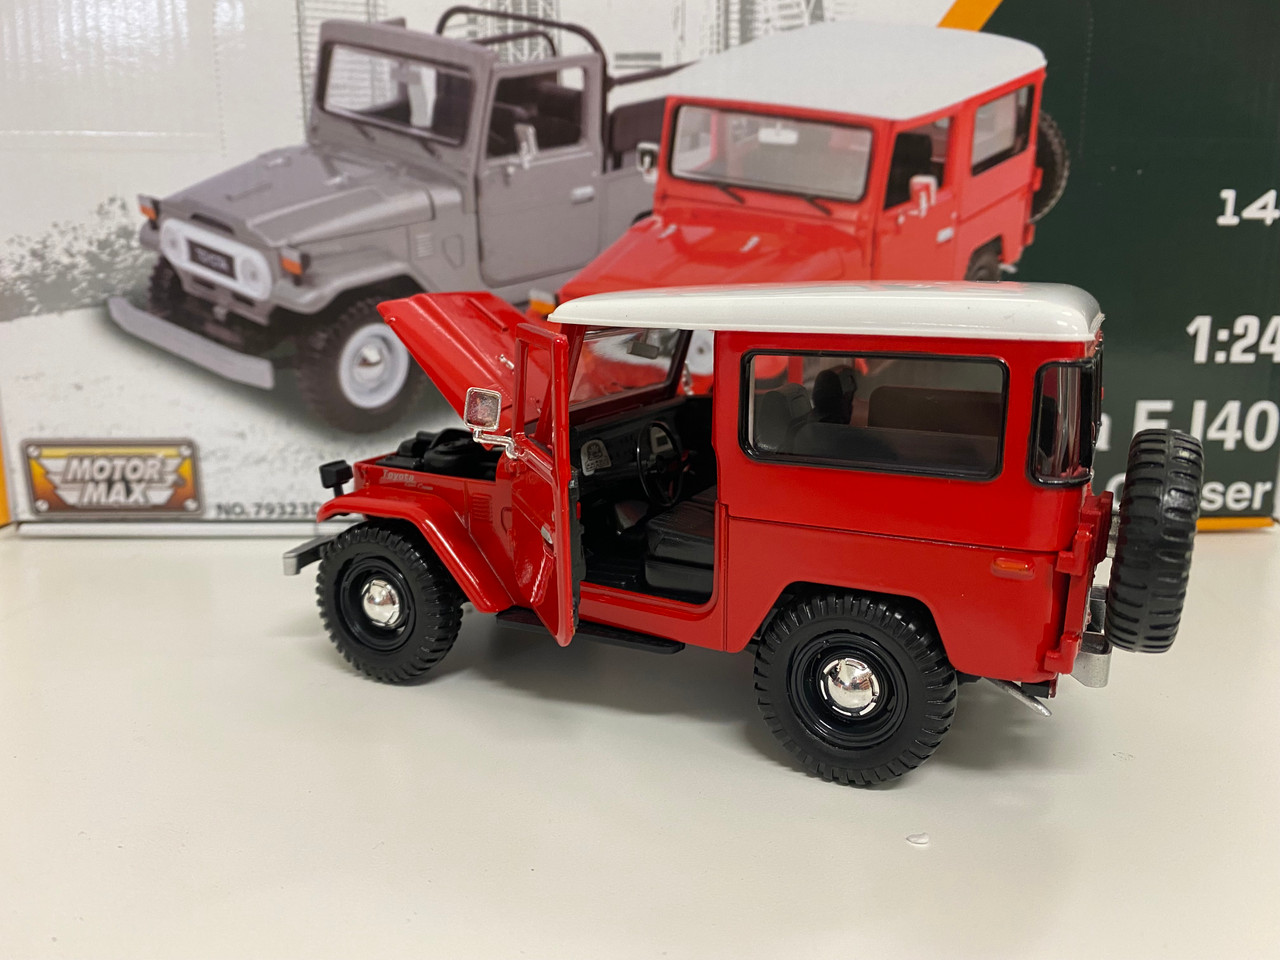 1/24 Motormax Toyota FJ40 (Red with White Top) Diecast Car Model (new no retail box)